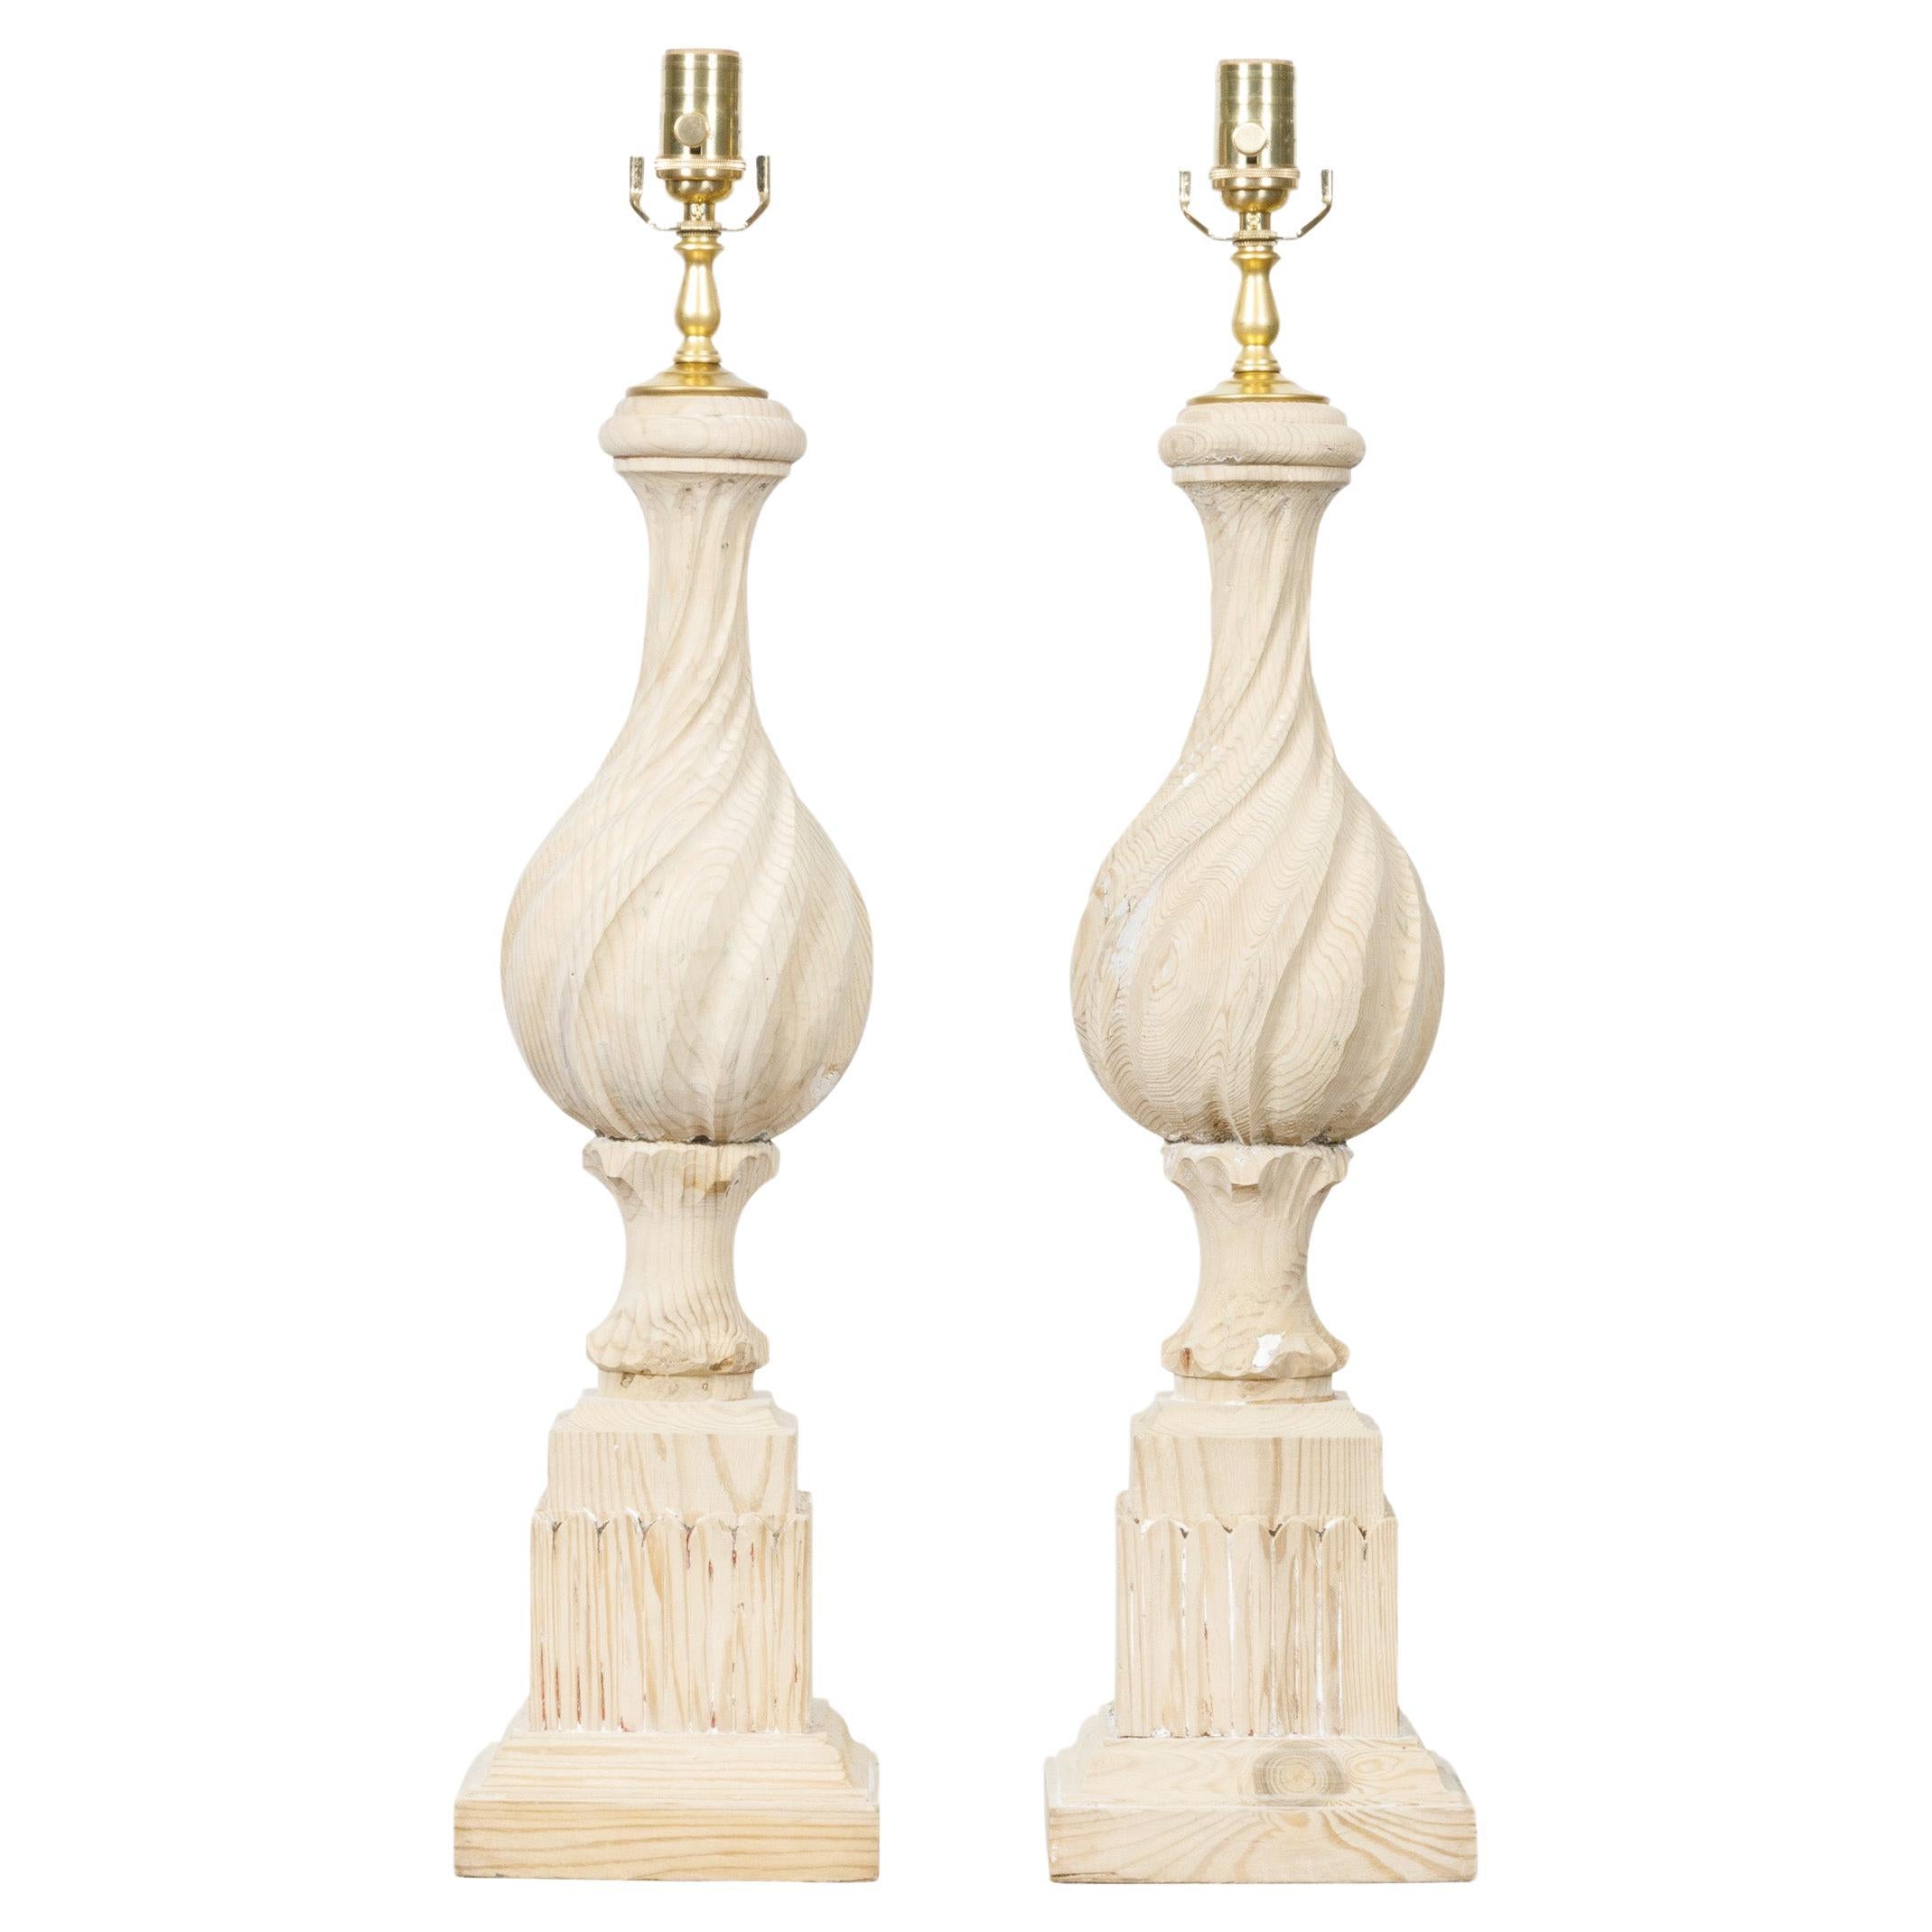 Pair of Pine Twisted Finials on Tall Bases Mounted as Table Lamps, USA Wired For Sale